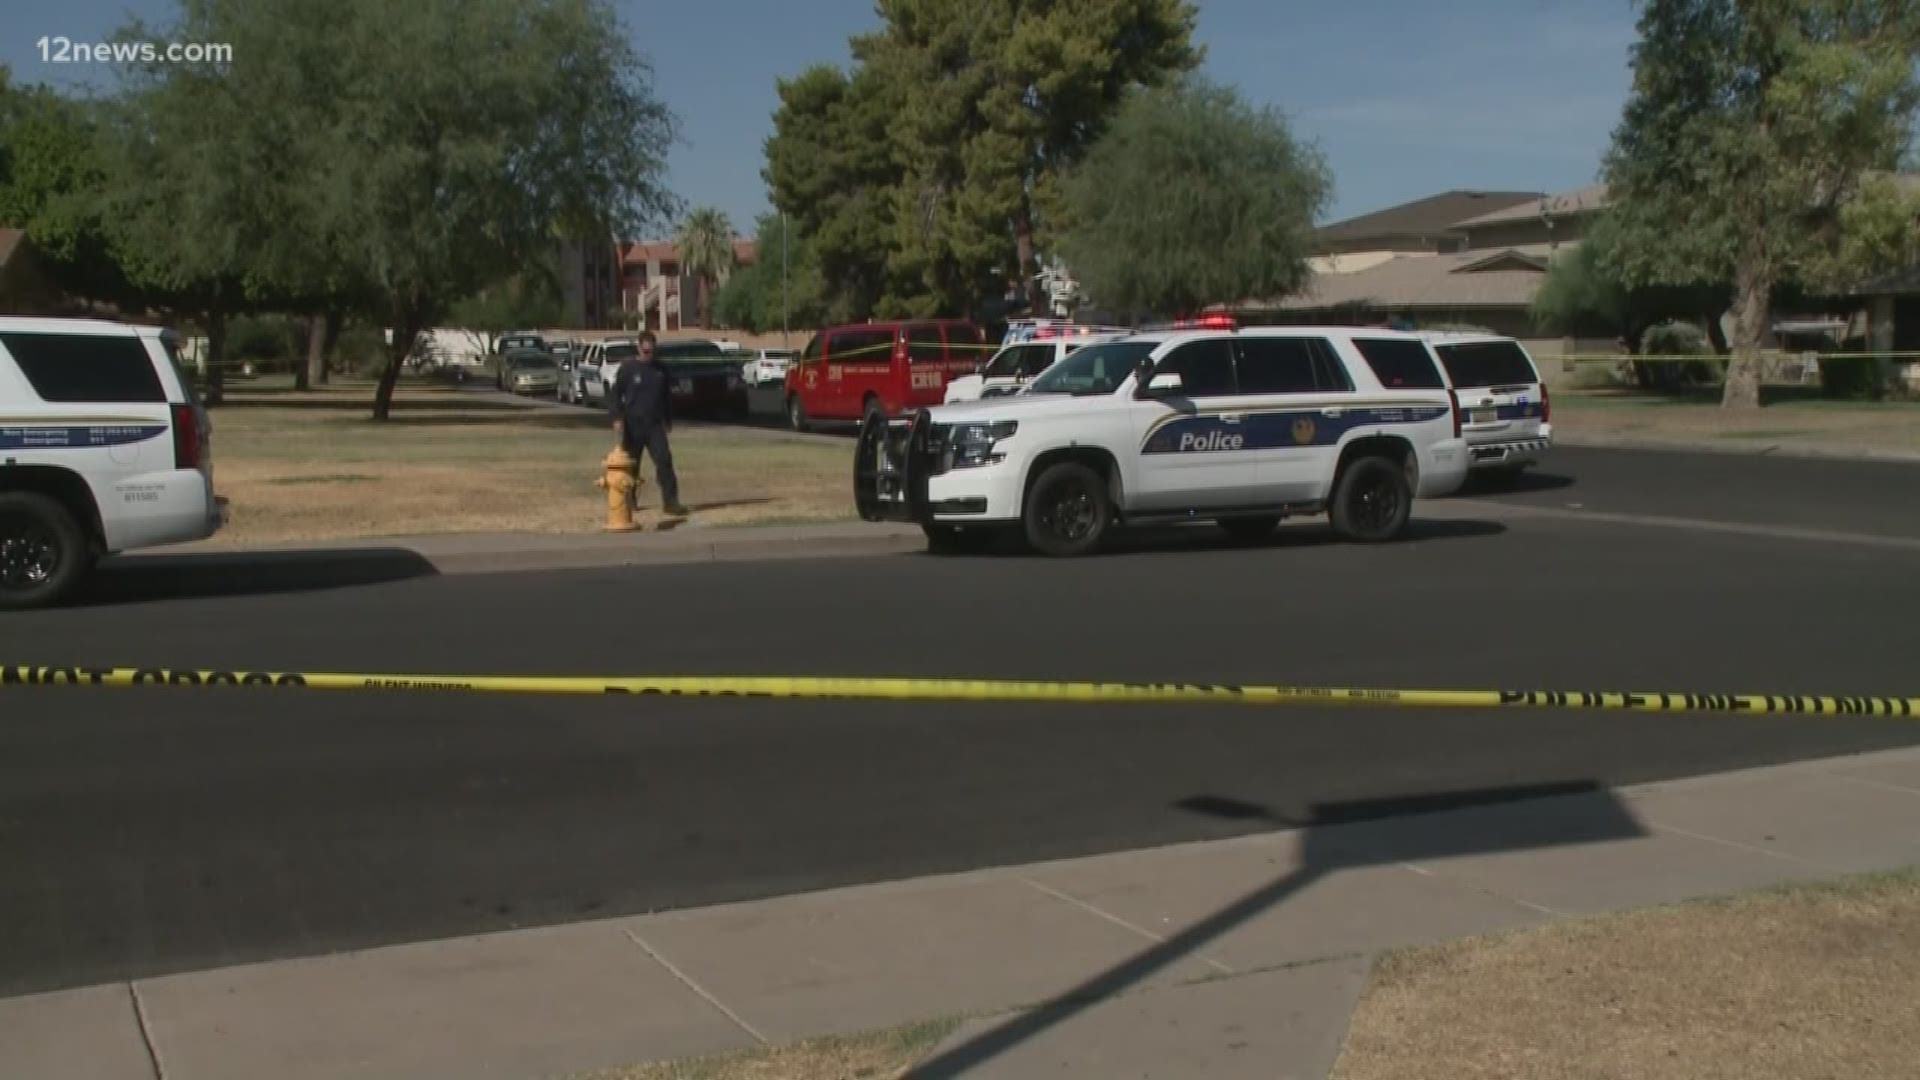 An infant is in extremely critical condition after being pulled from a bathtub at a Phoenix home on Saturday. Team 12's Antonia Mejia has the latest.